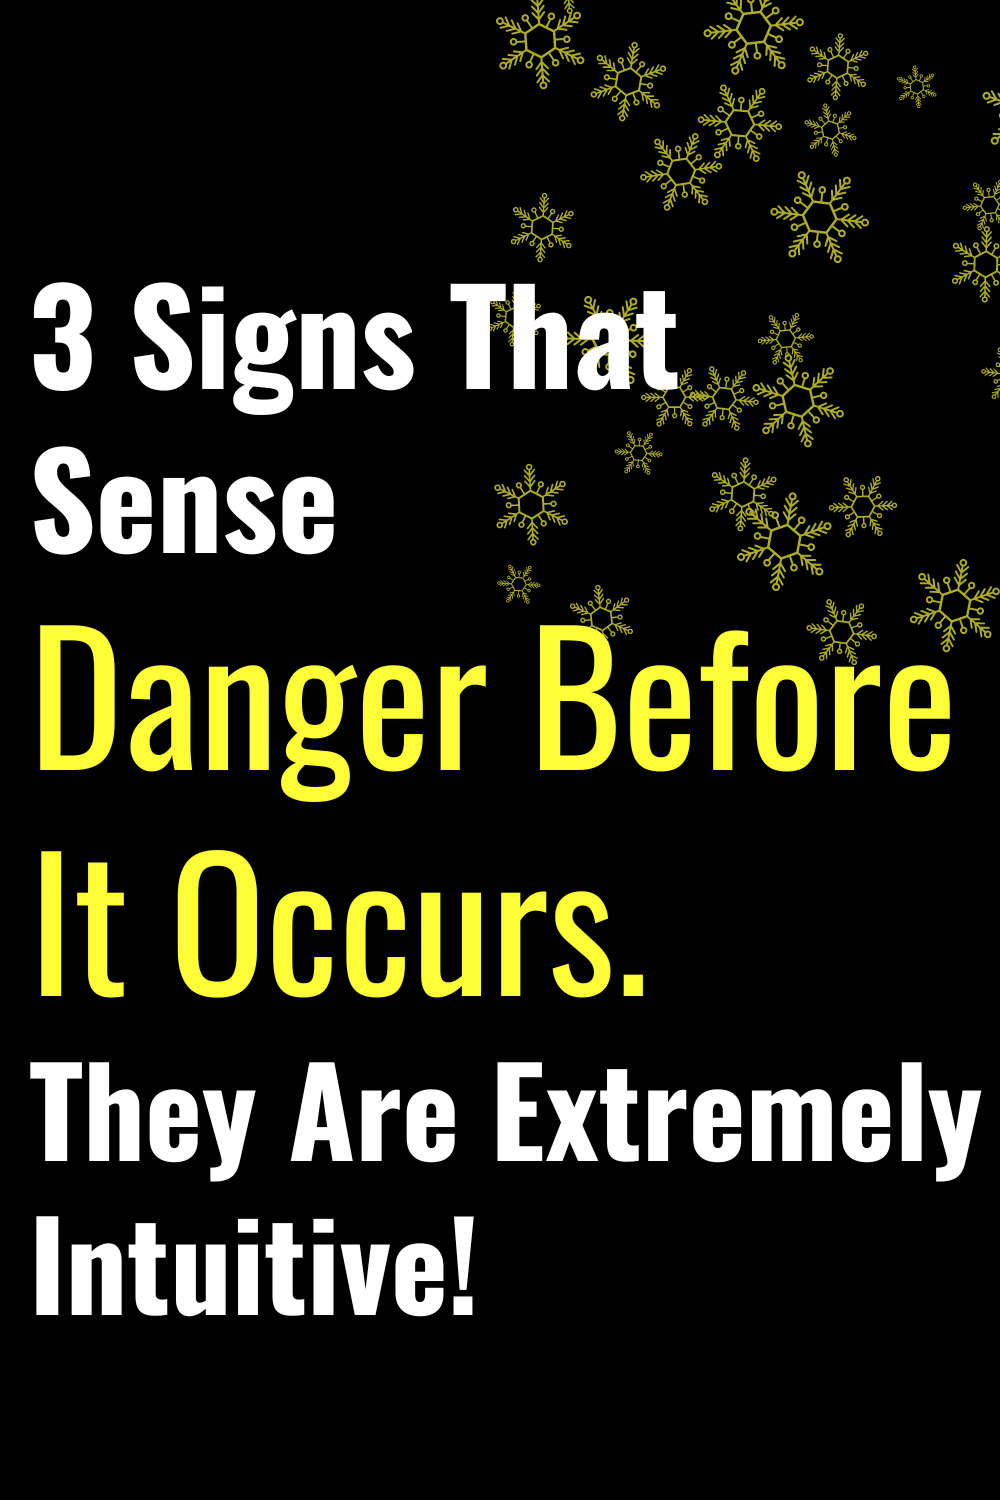 3 Signs That Sense Danger Before It Occurs. They Are Extremely Intuitive!